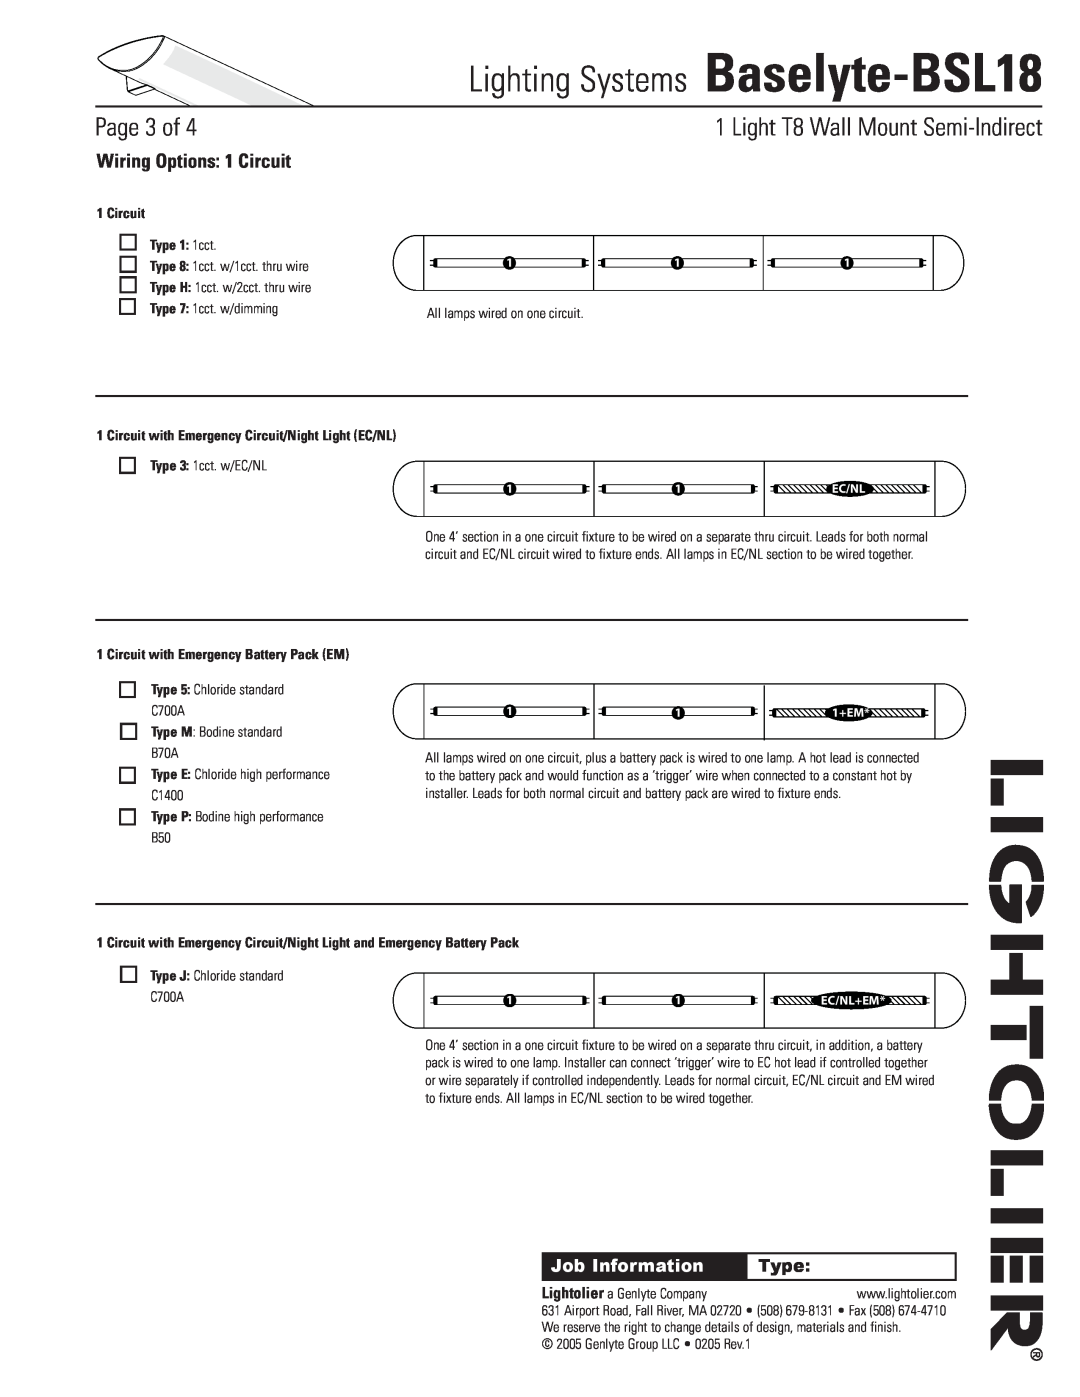 Lightolier Baselyte-BSL18 Wiring Options 1 Circuit, Circuit Type 1 1cct, Circuit with Emergency Battery Pack EM, Page of 